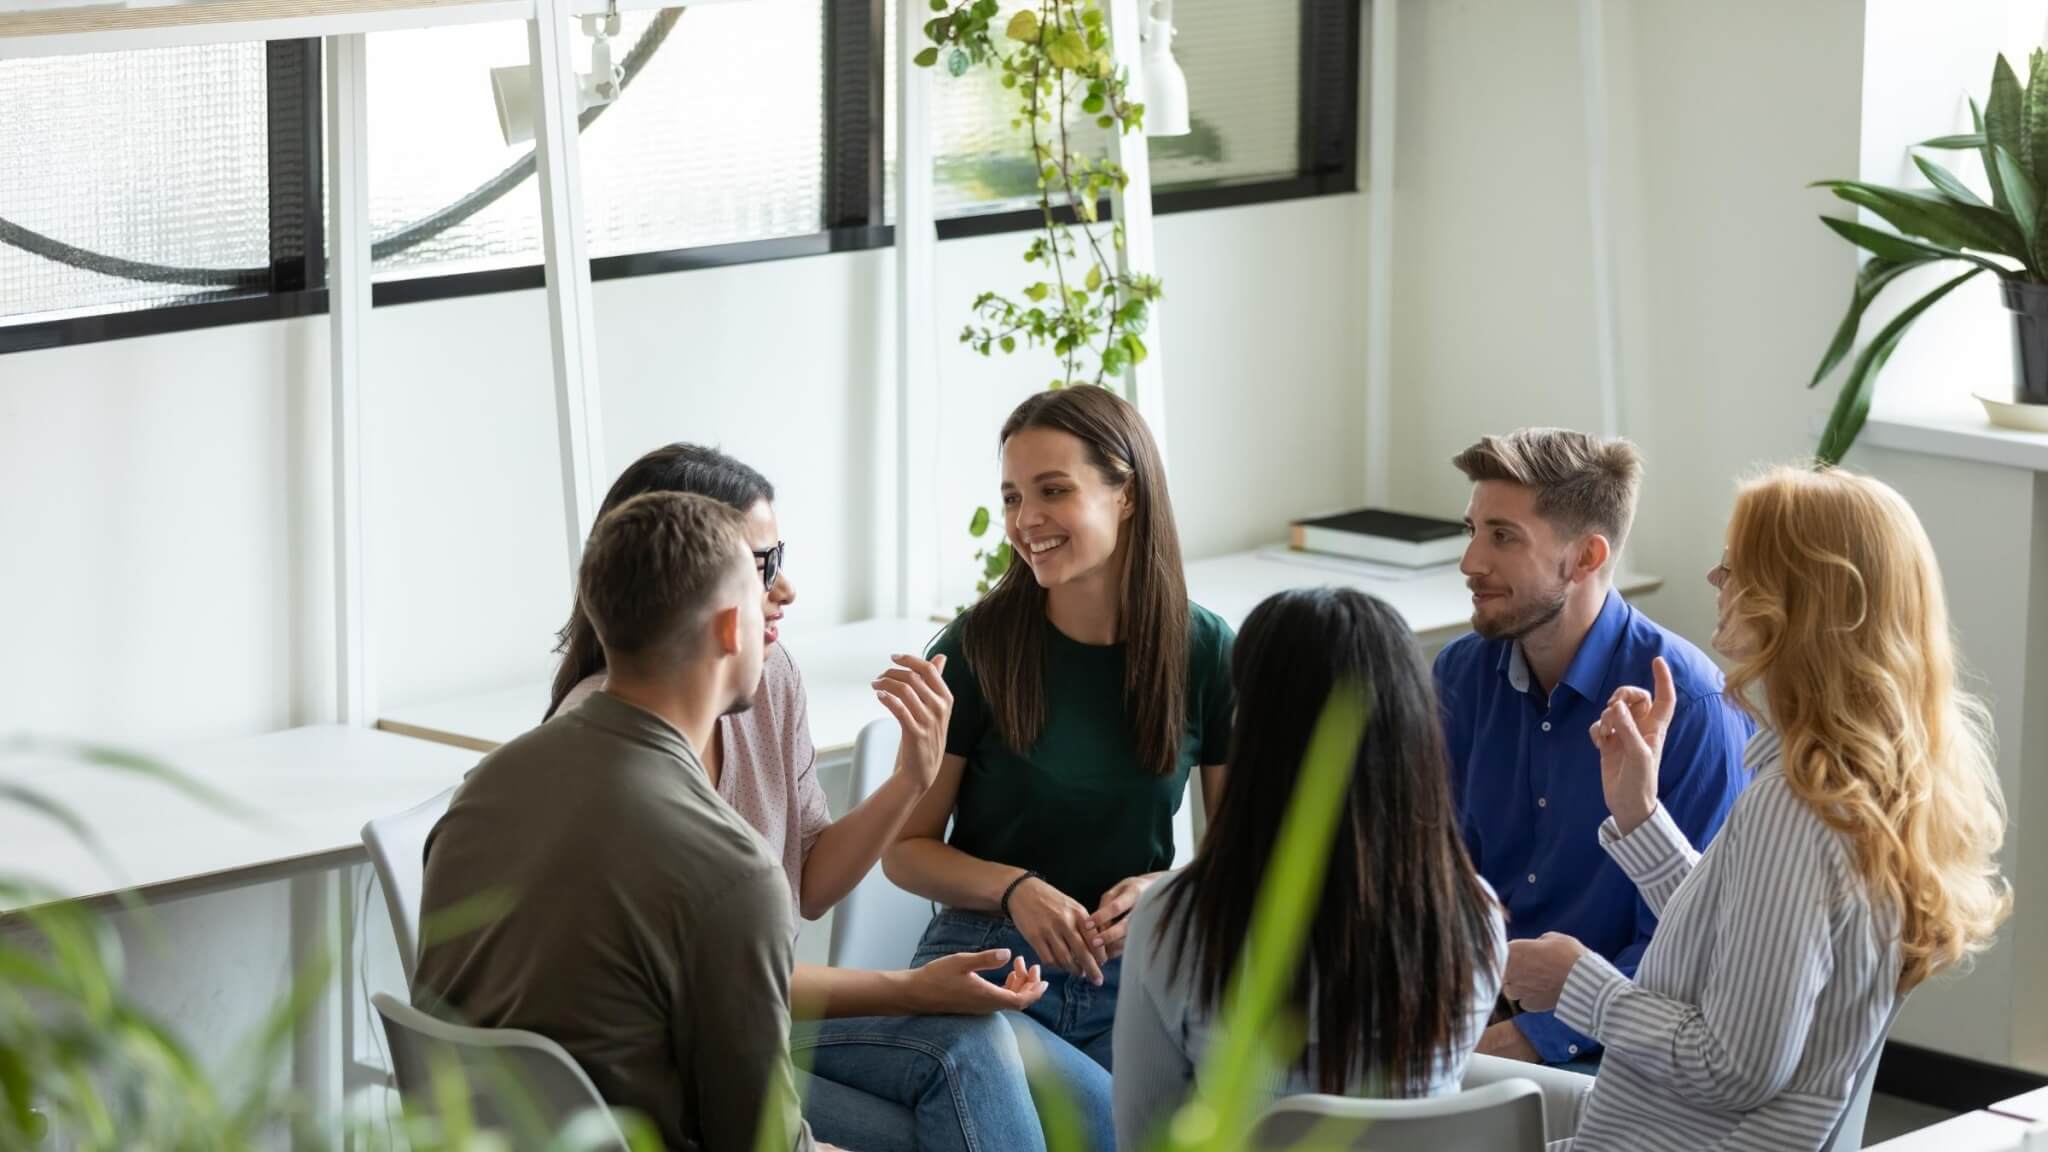 10 Ways to Conduct A Positive Meeting